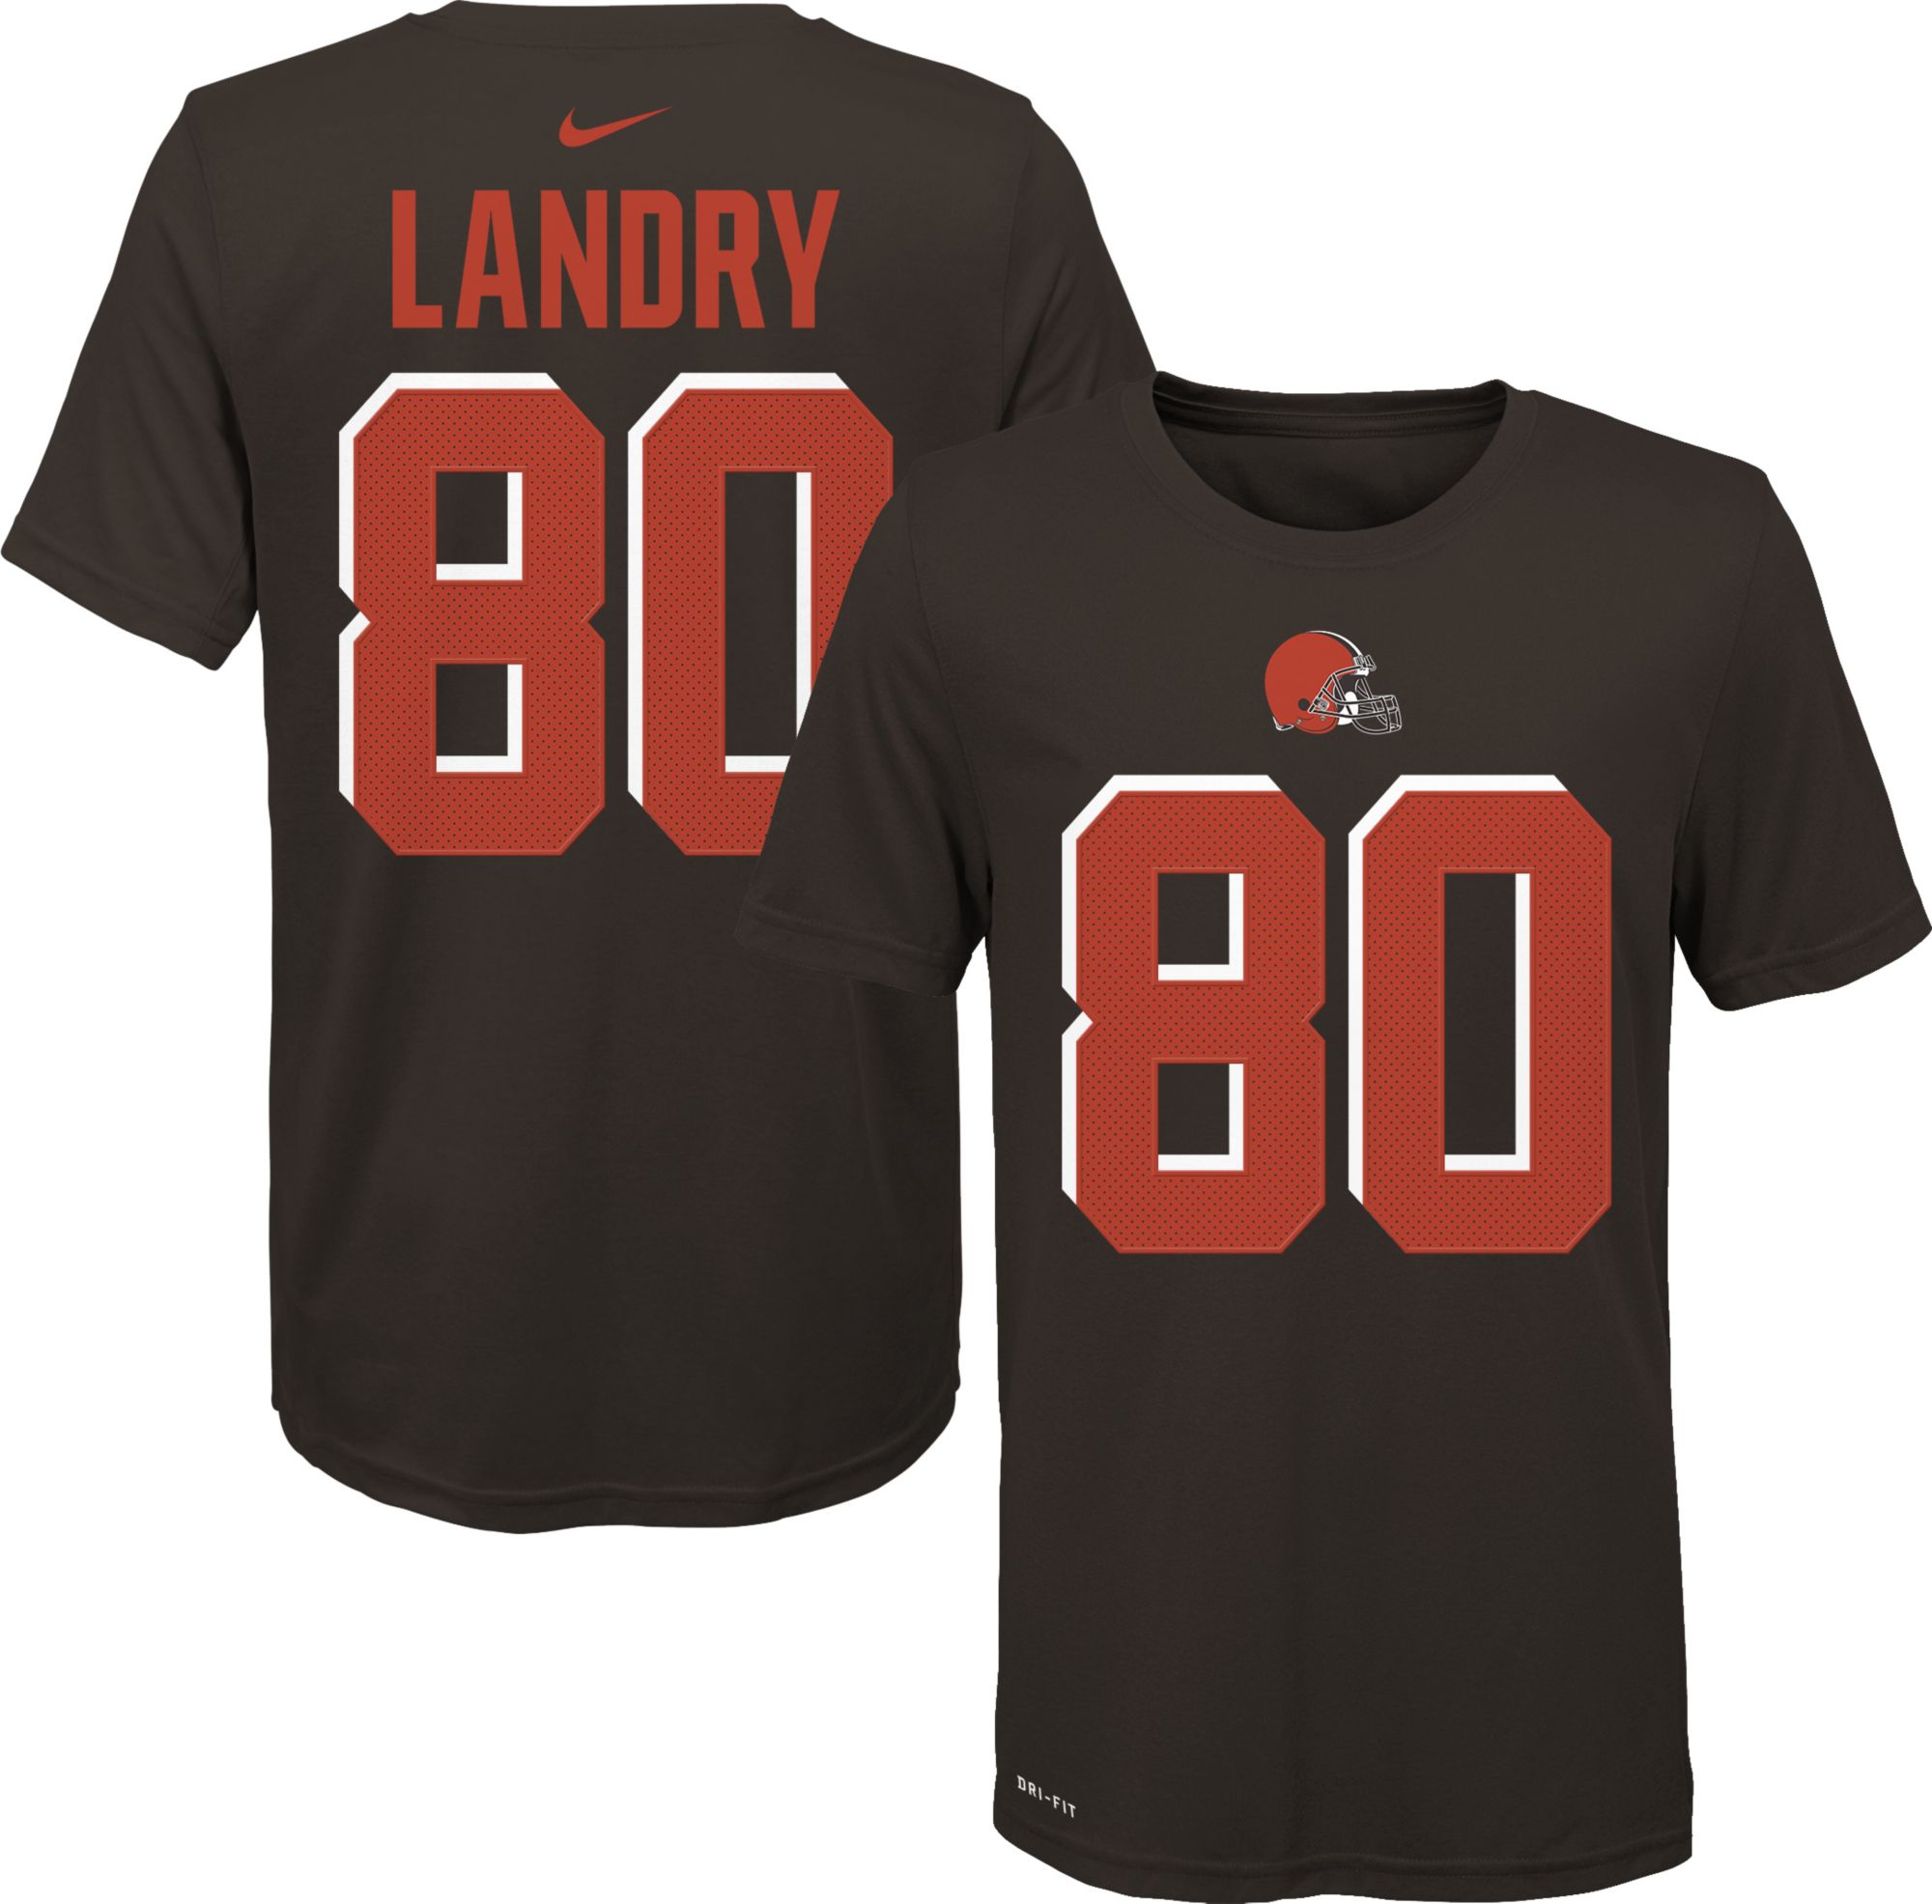 jarvis landry jersey browns